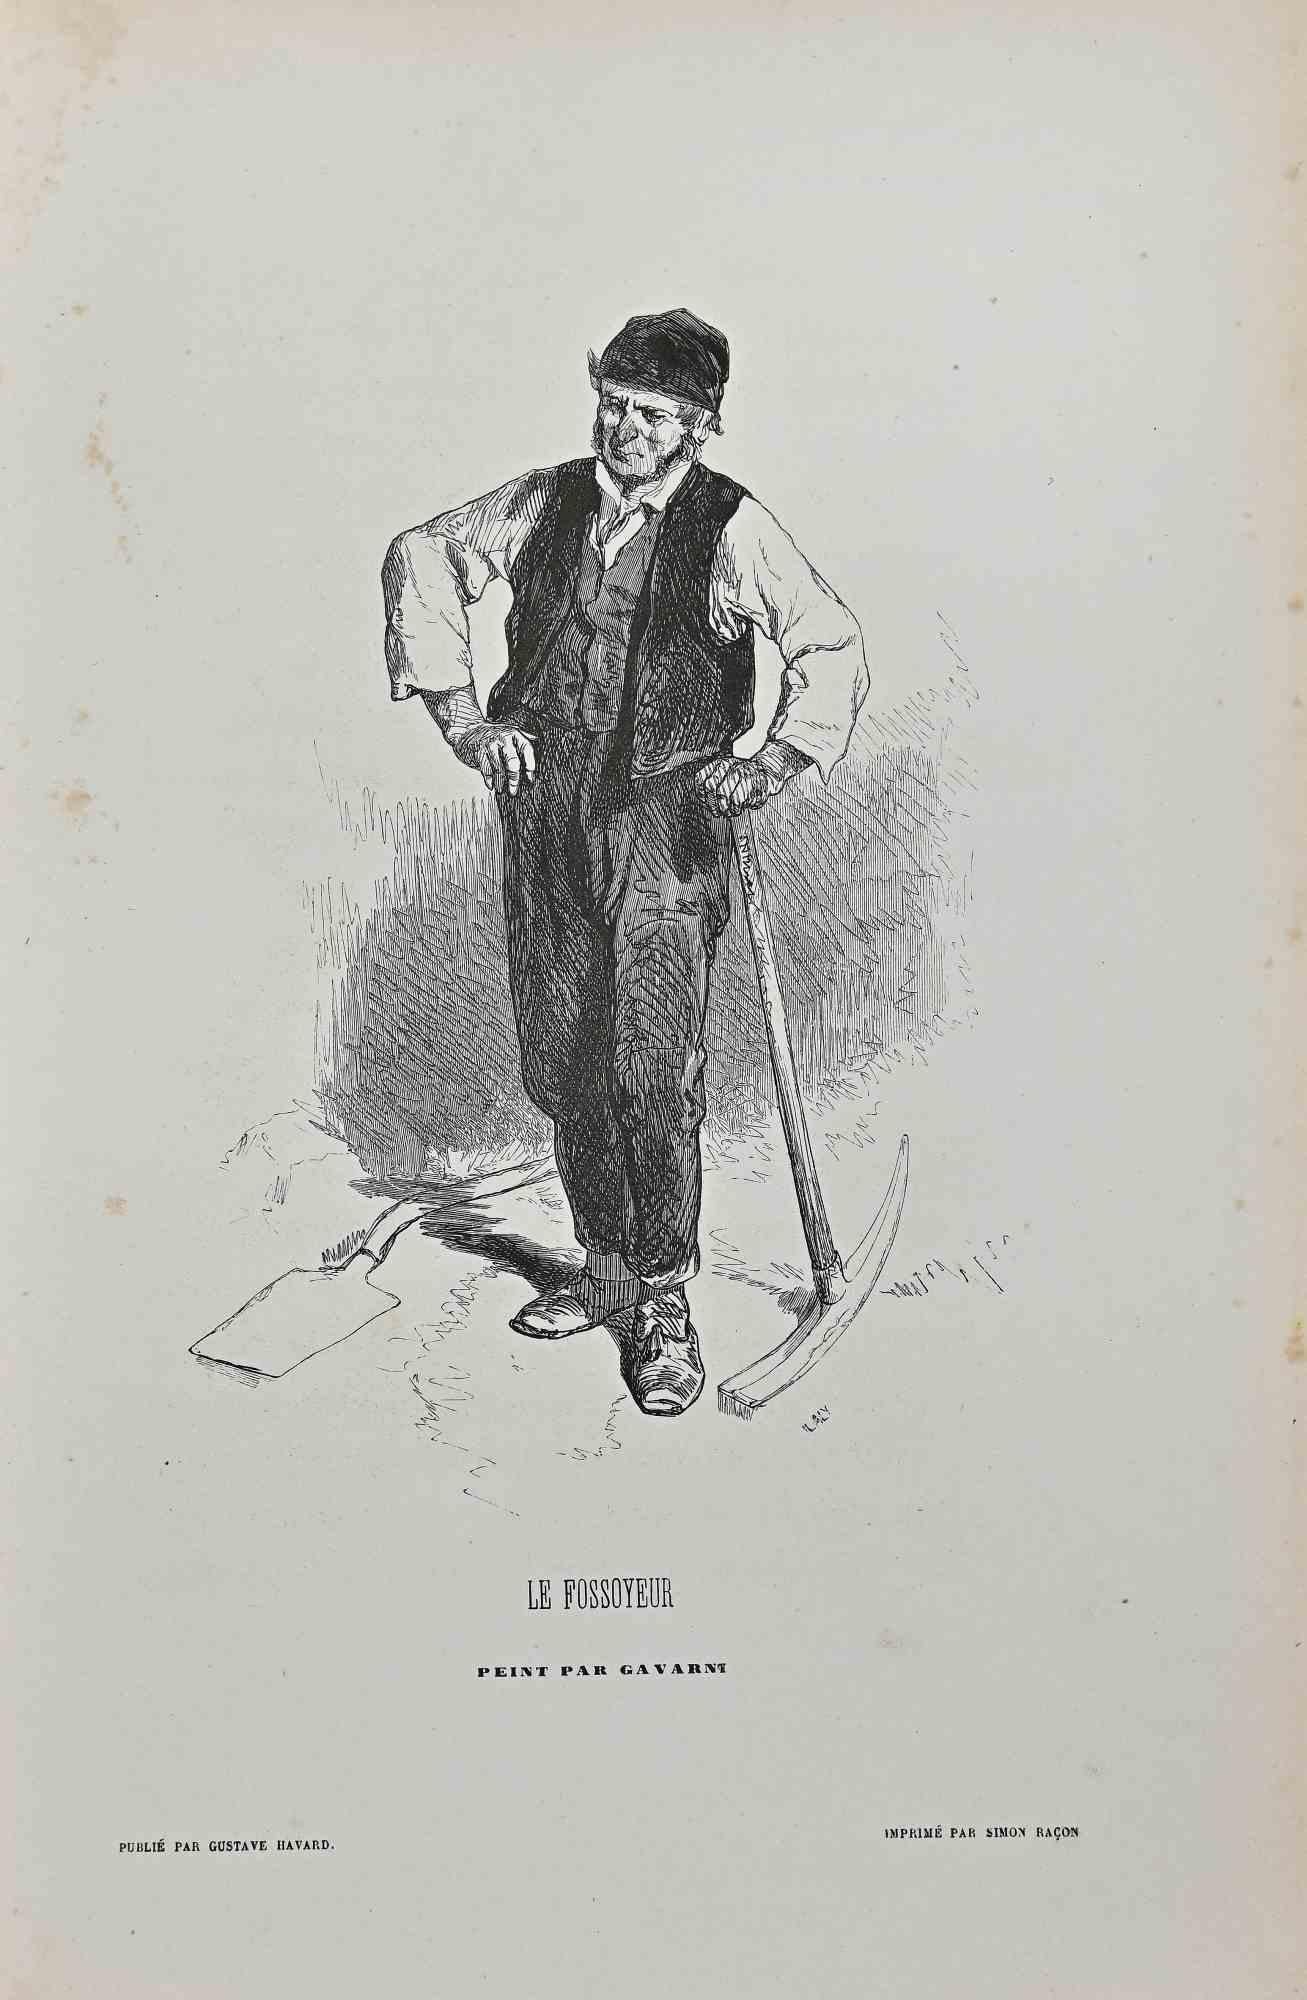 Le Fossoyeur is a lithograph on ivory-colored paper, realized by the French draftsman Paul Gavarni (alias Guillaume Sulpice Chevalier Gavarni, 1804-1866) in the mid-19th Century.

Signed on the plate" Par Gavarni".

From series of "Masques et